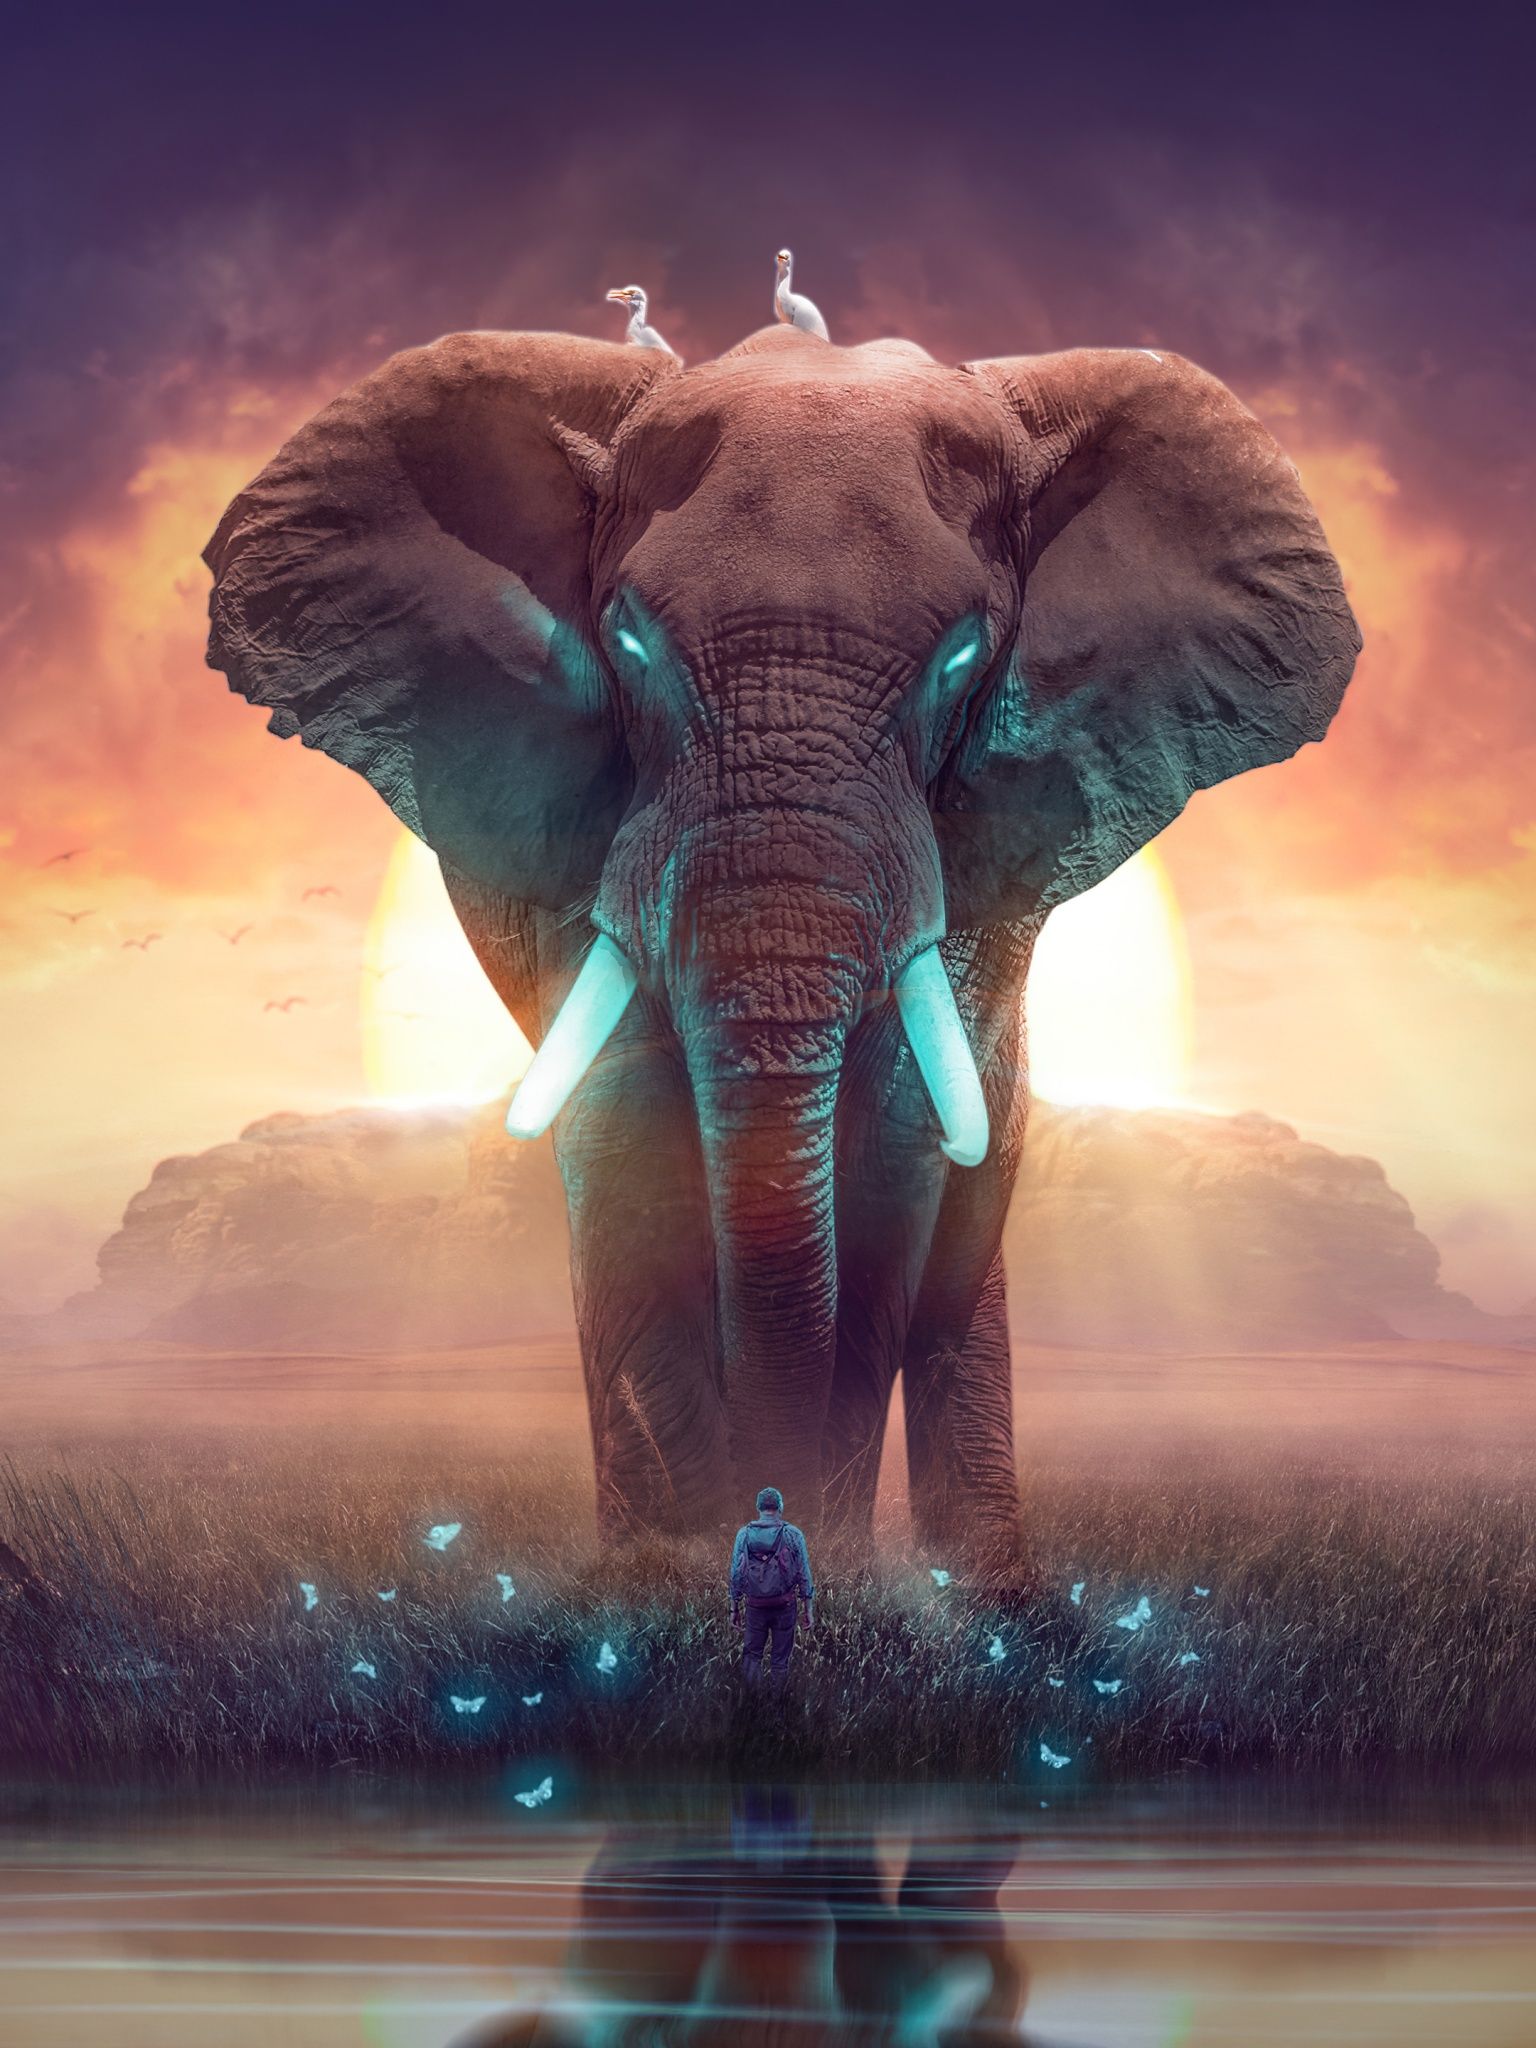 A giant elephant with glowing eyes and tusks, standing in a grassy field with a man in front of it. - Elephant